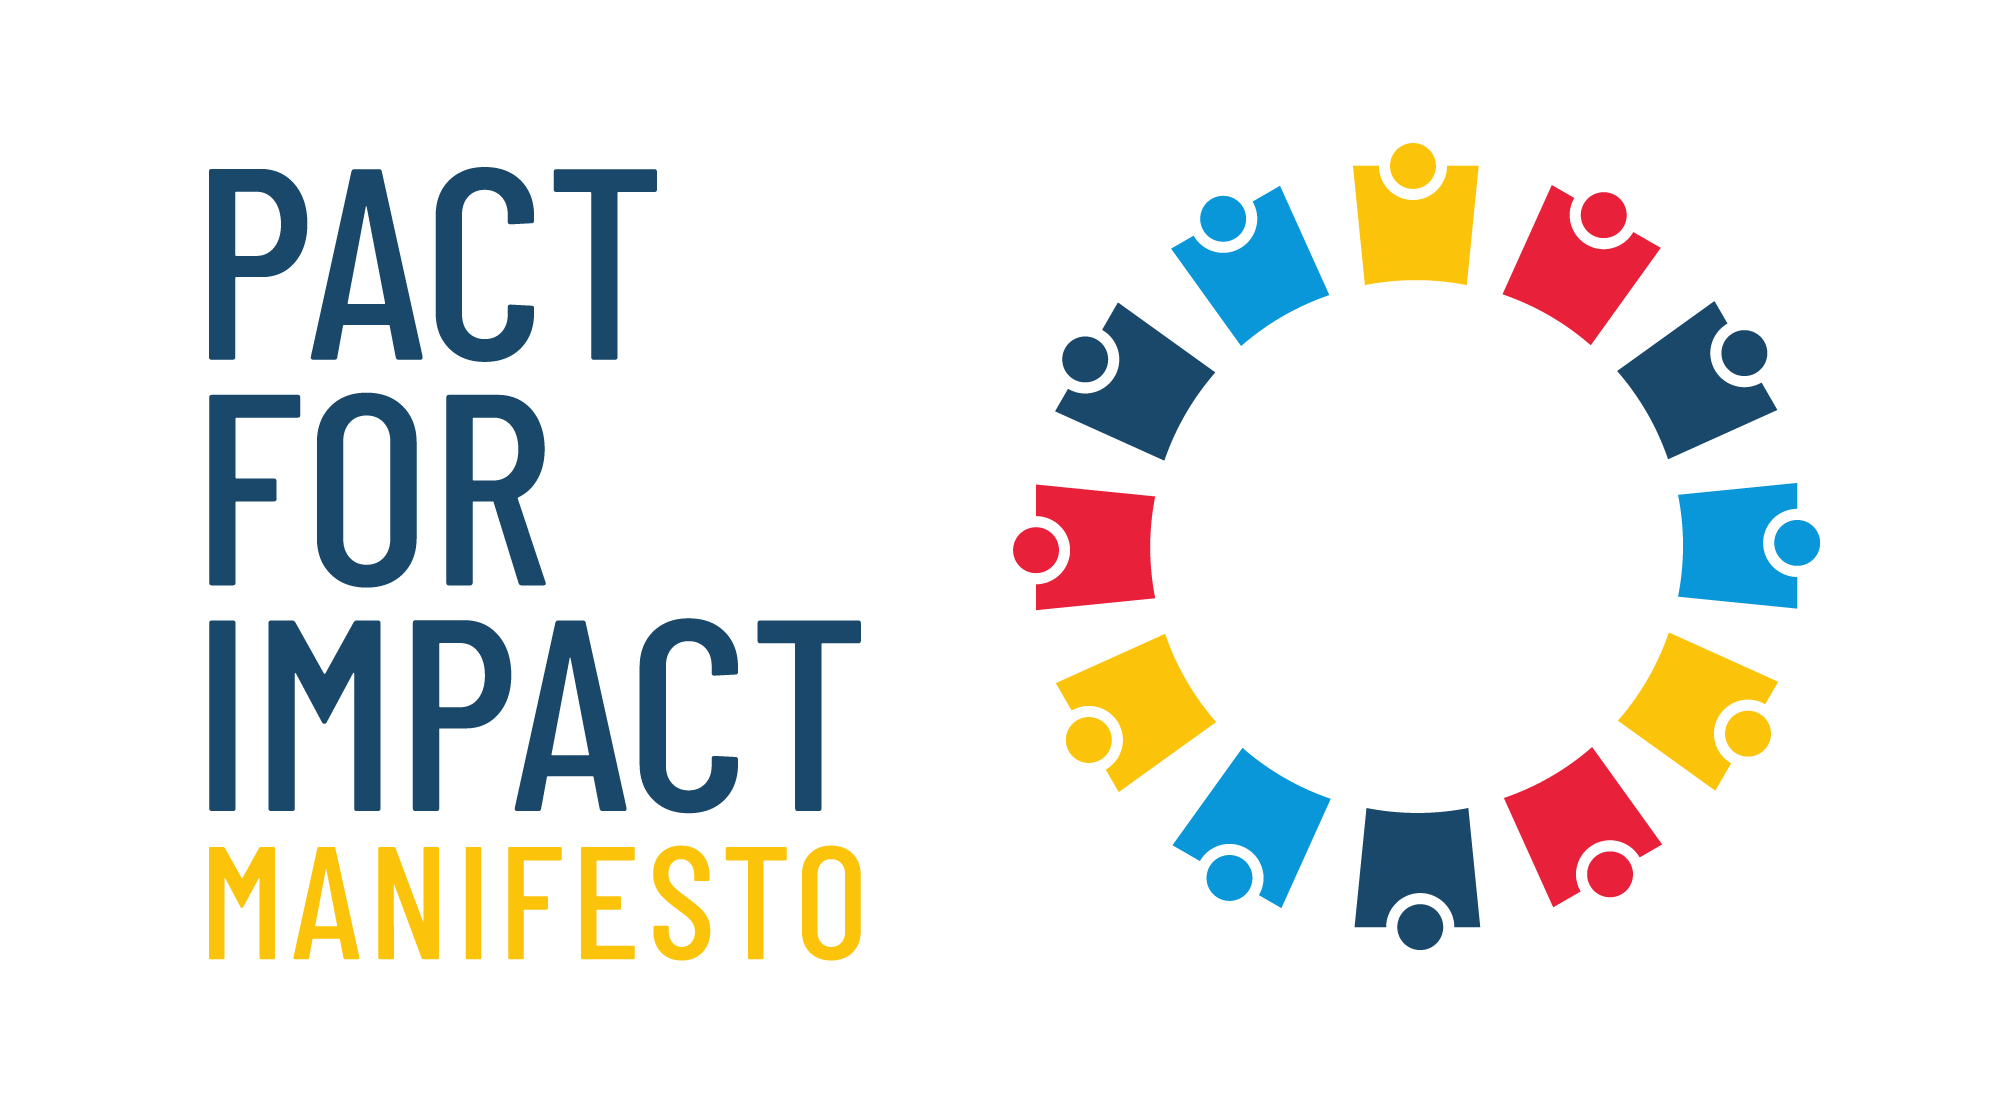 The Pact for Impact Manifesto!